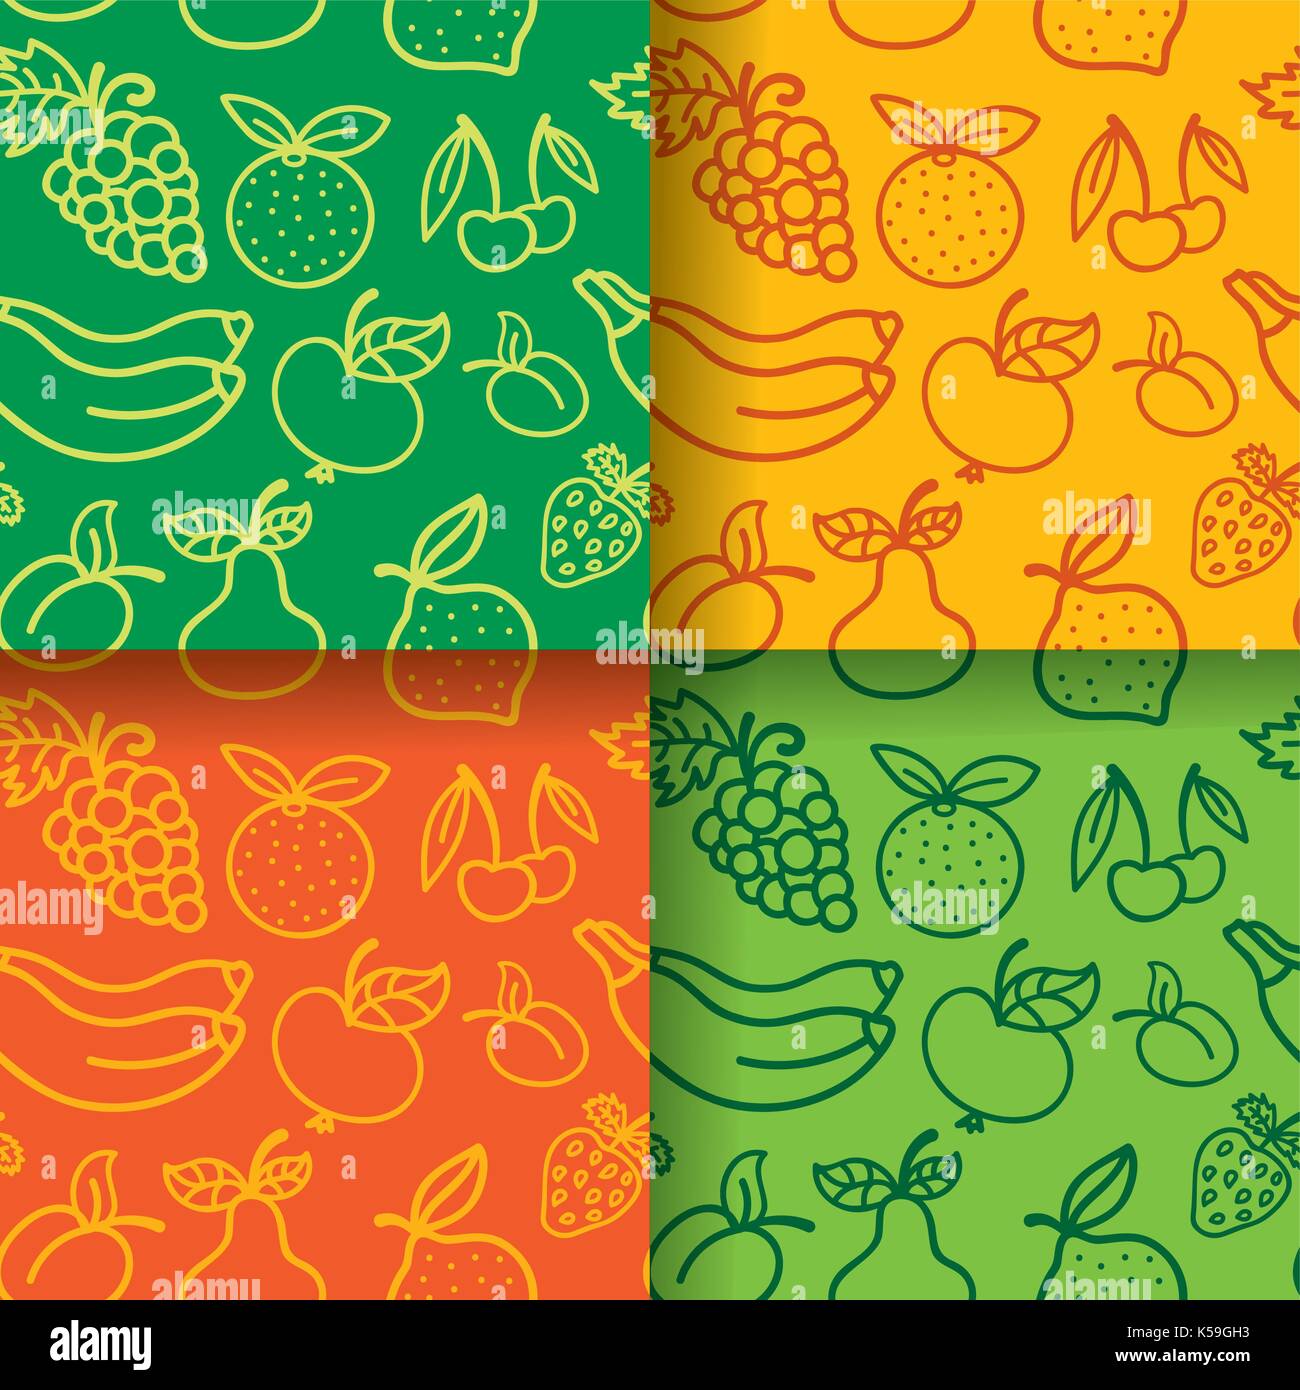 illustration of seamless pattern of fruits and berries in different colors Stock Vector